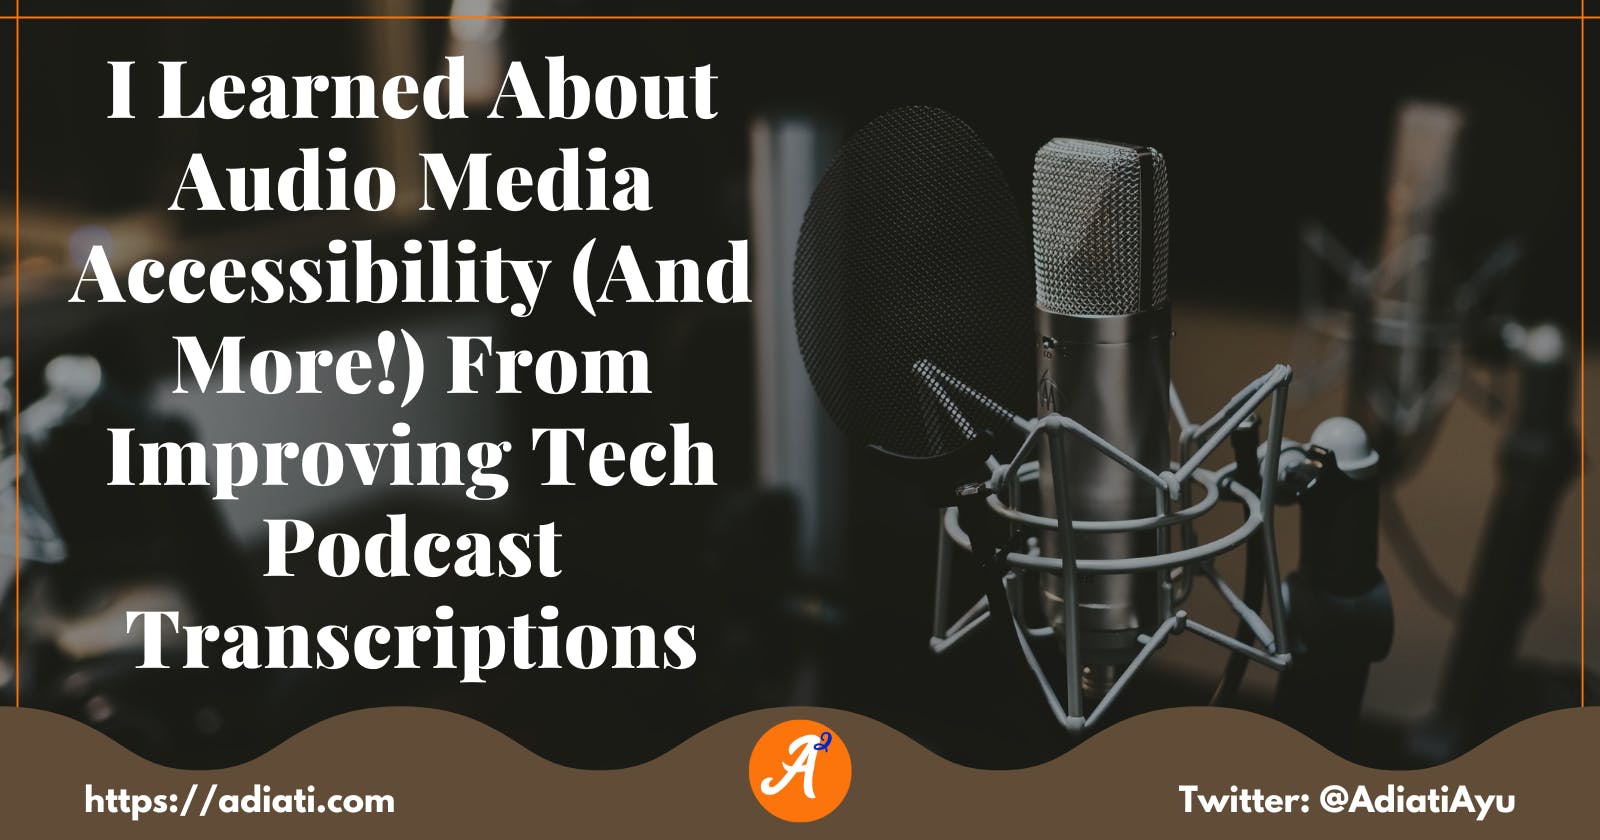 I Learned About Audio Media Accessibility (And More!) From Improving Tech Podcast Transcriptions